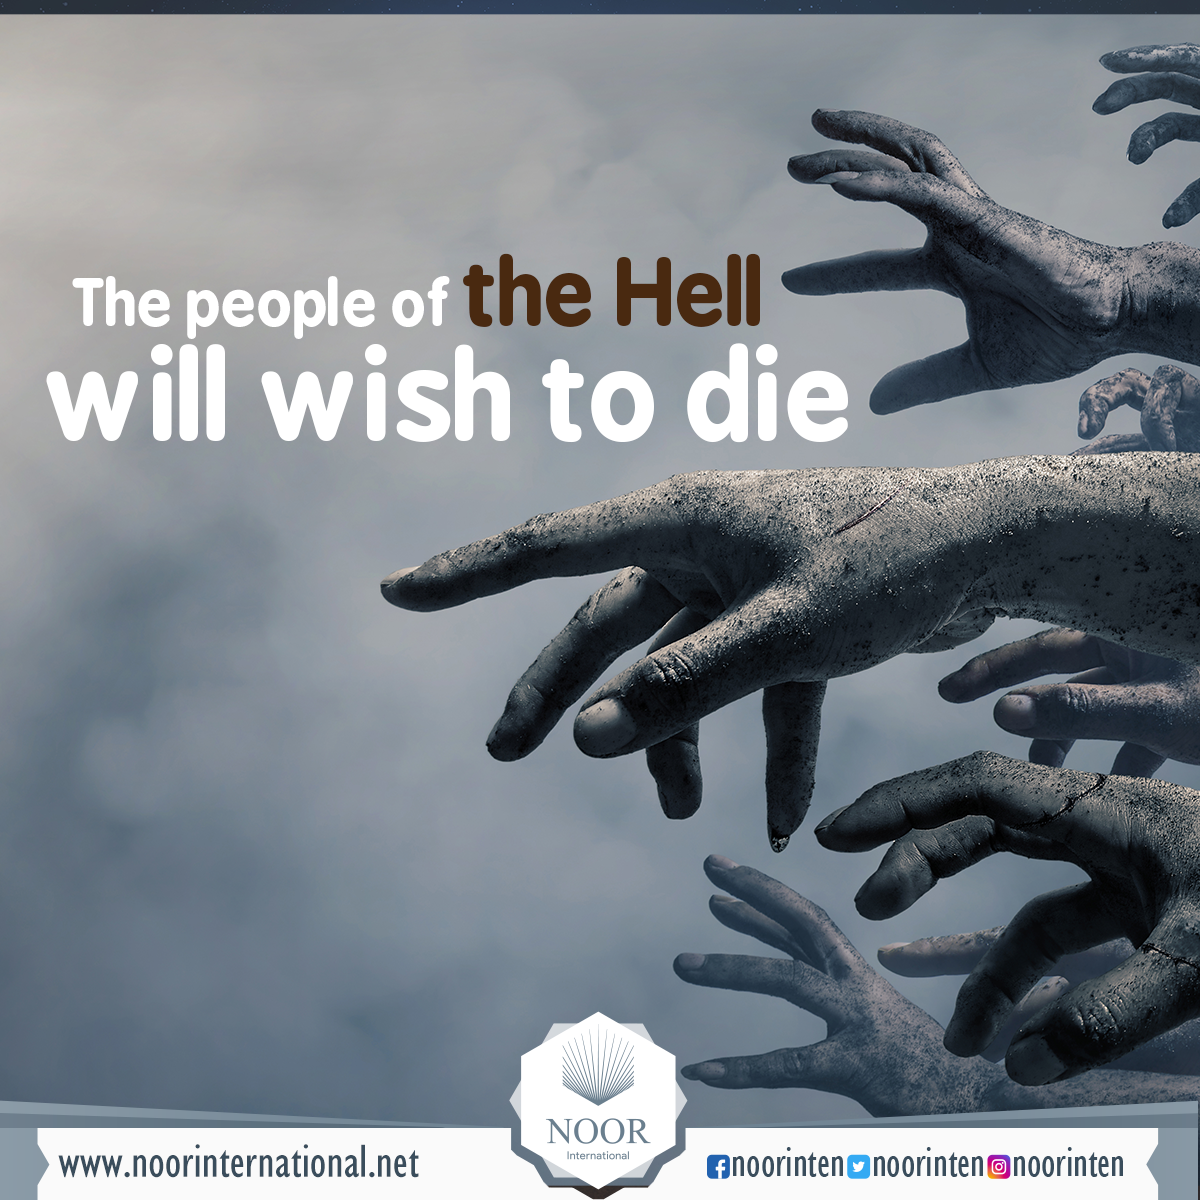 The people of the Hell will wish to die